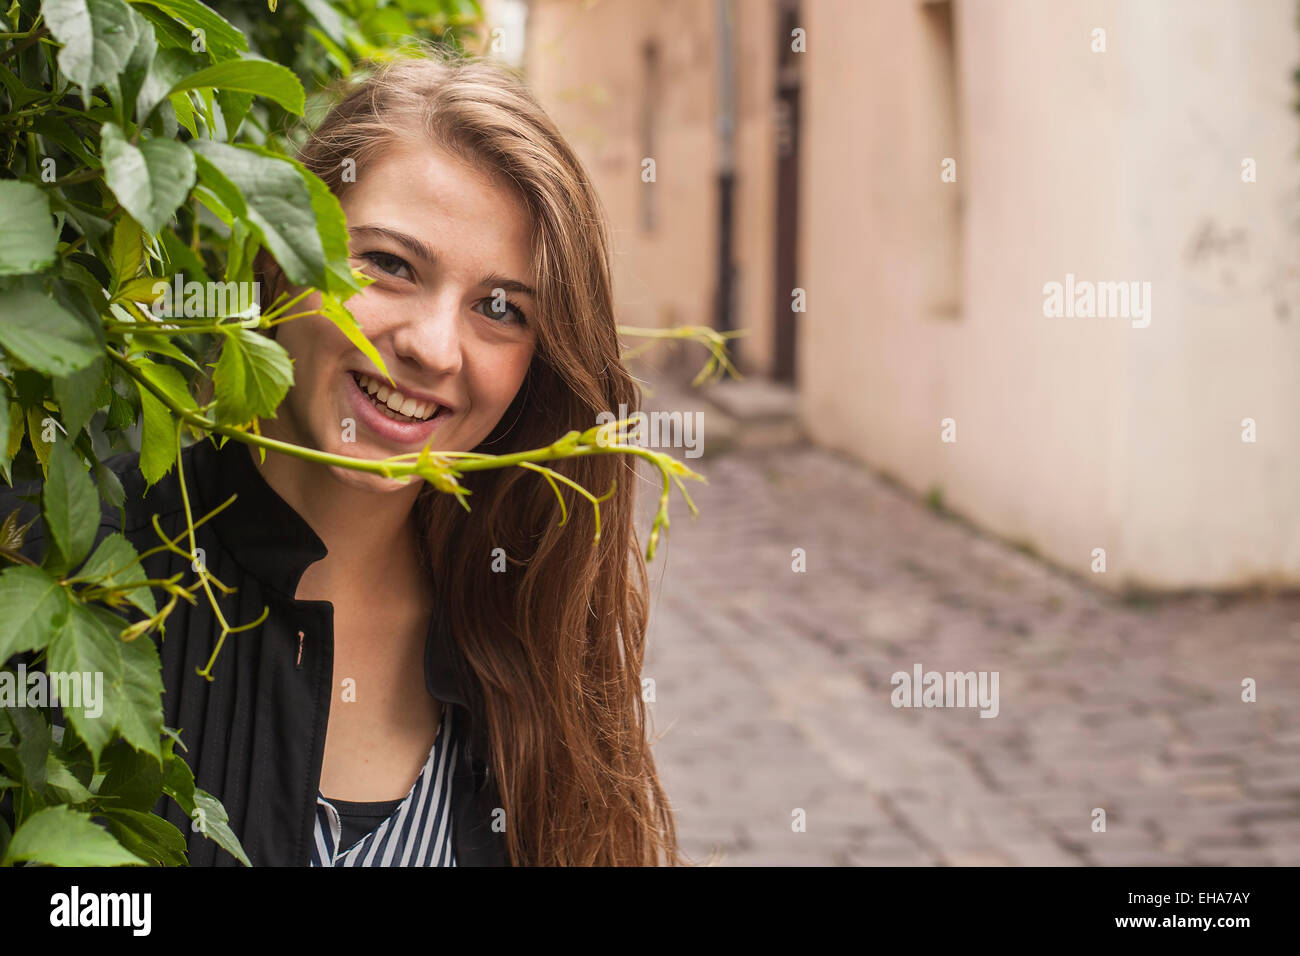 Young pretty girl portrait outdoors. Stock Photo